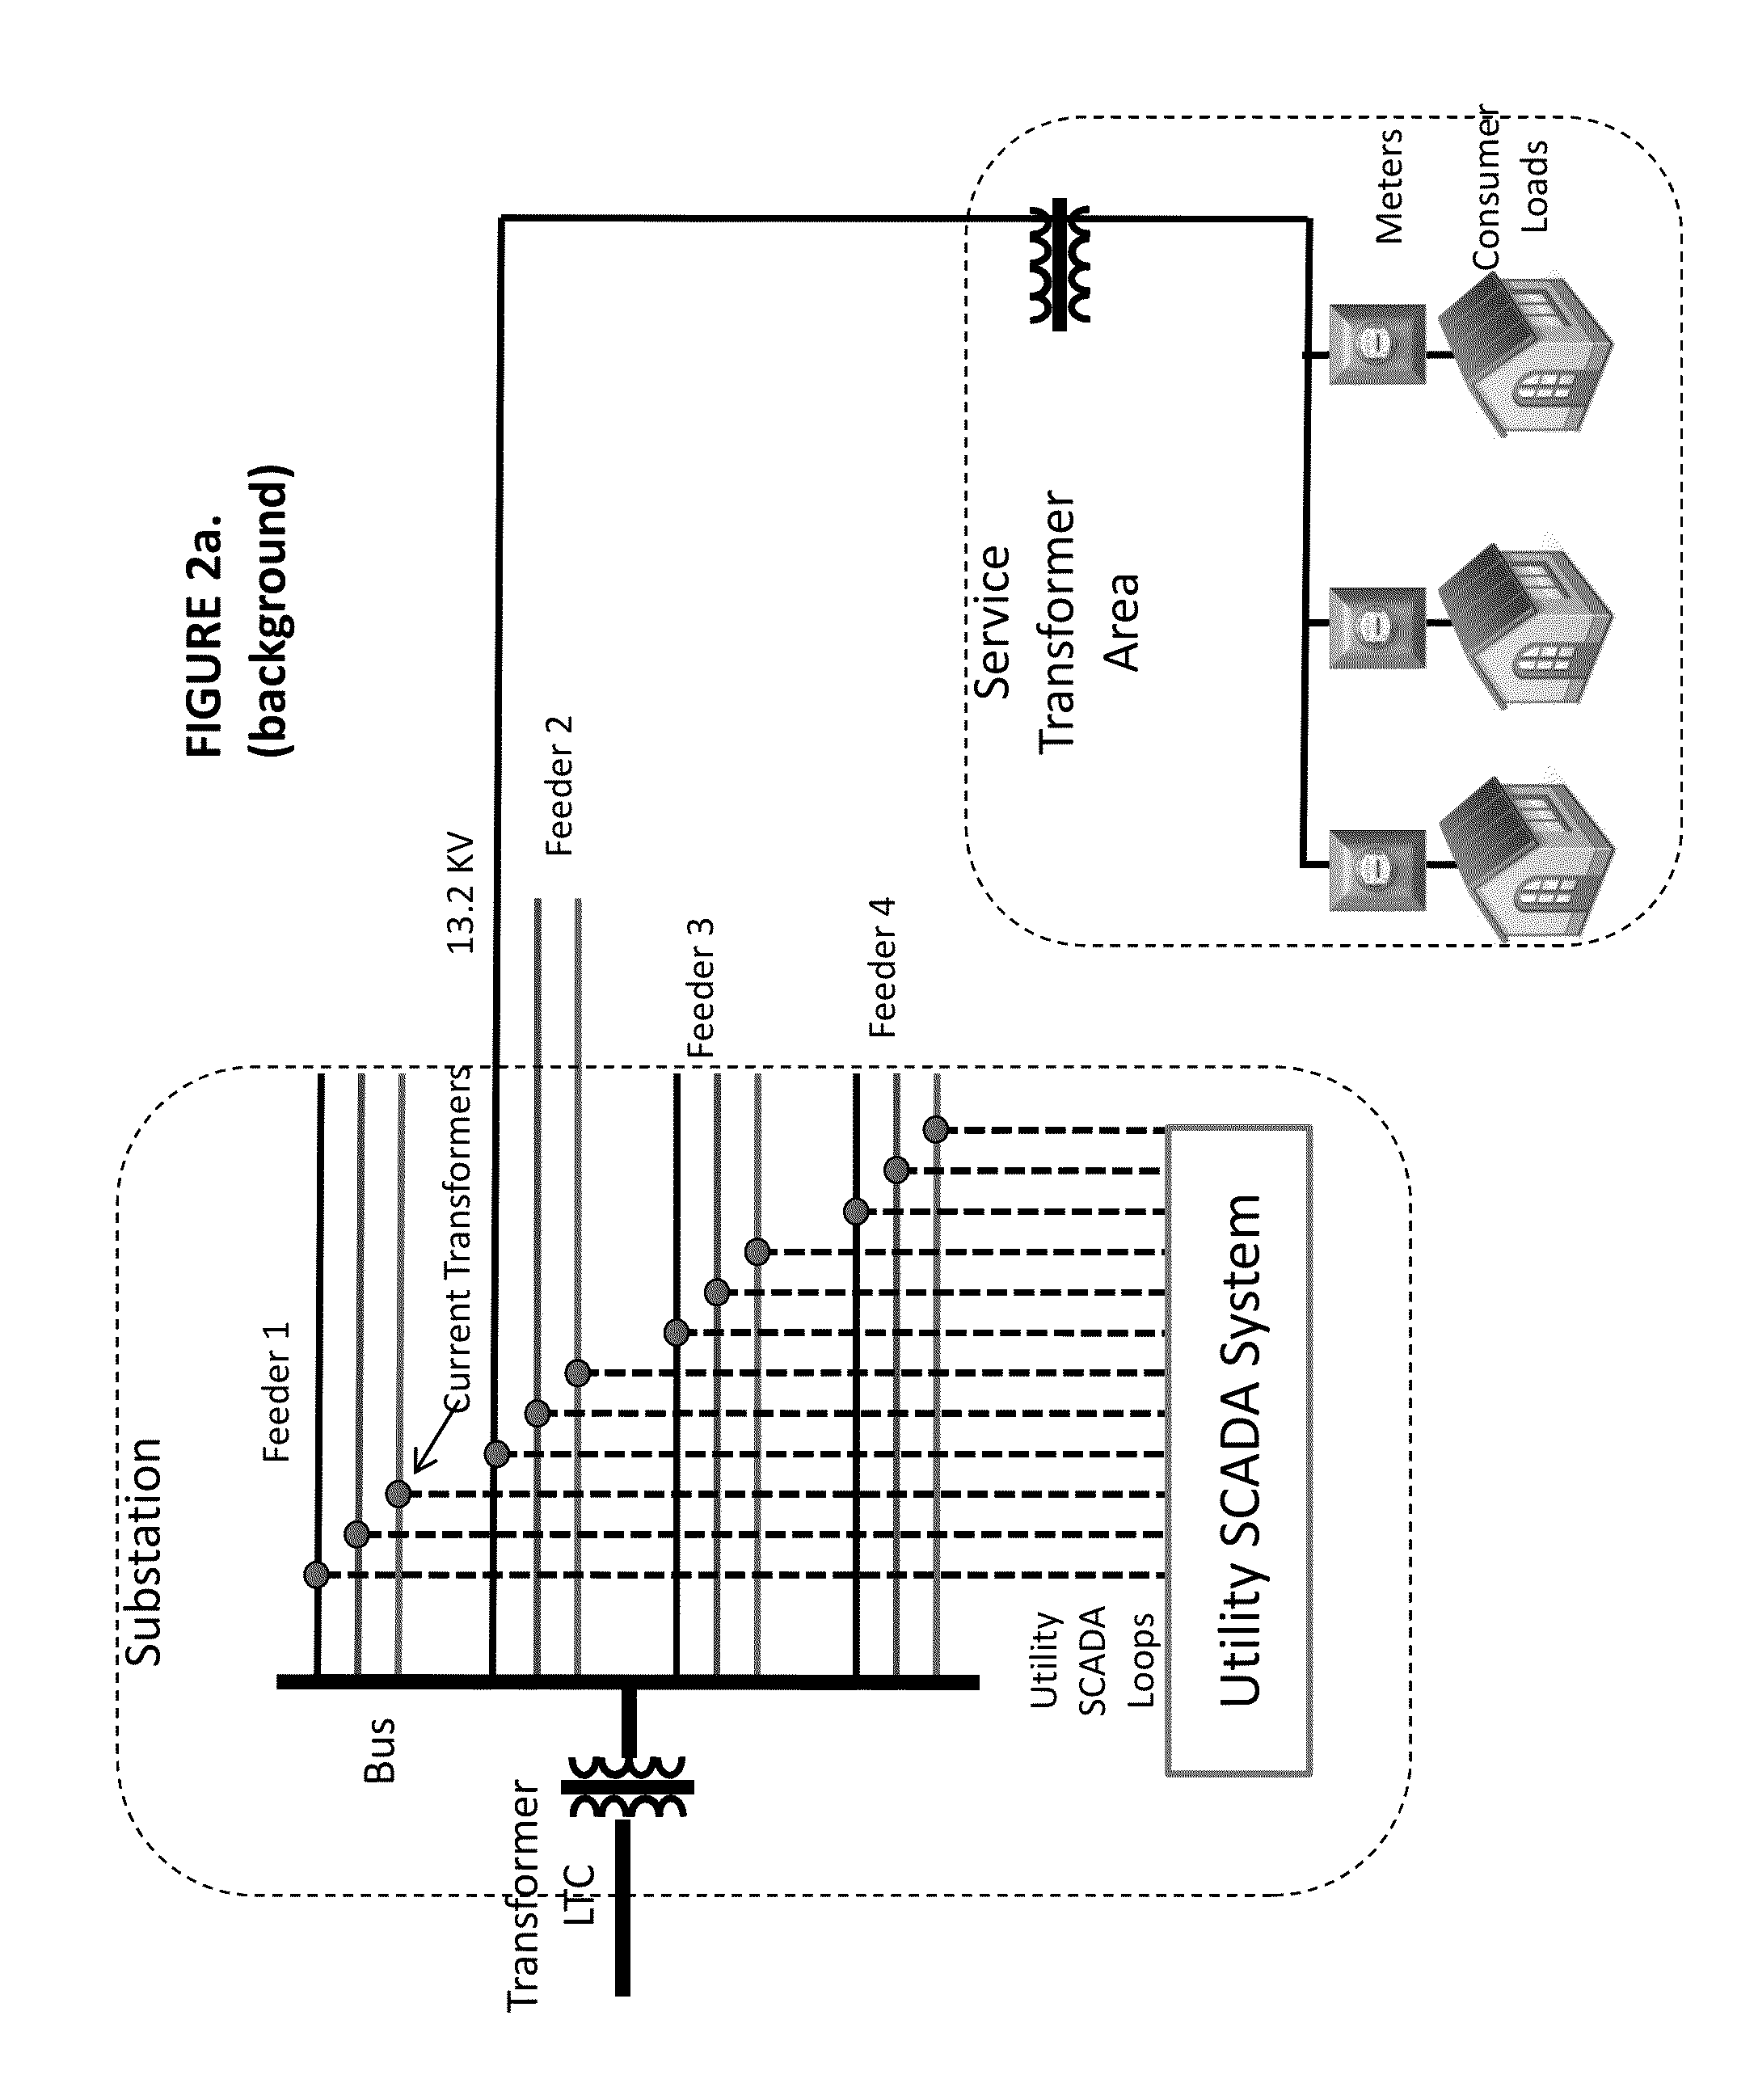 Methods for analyzing and optimizing the performance of a data collection network on an electrical distribution grid